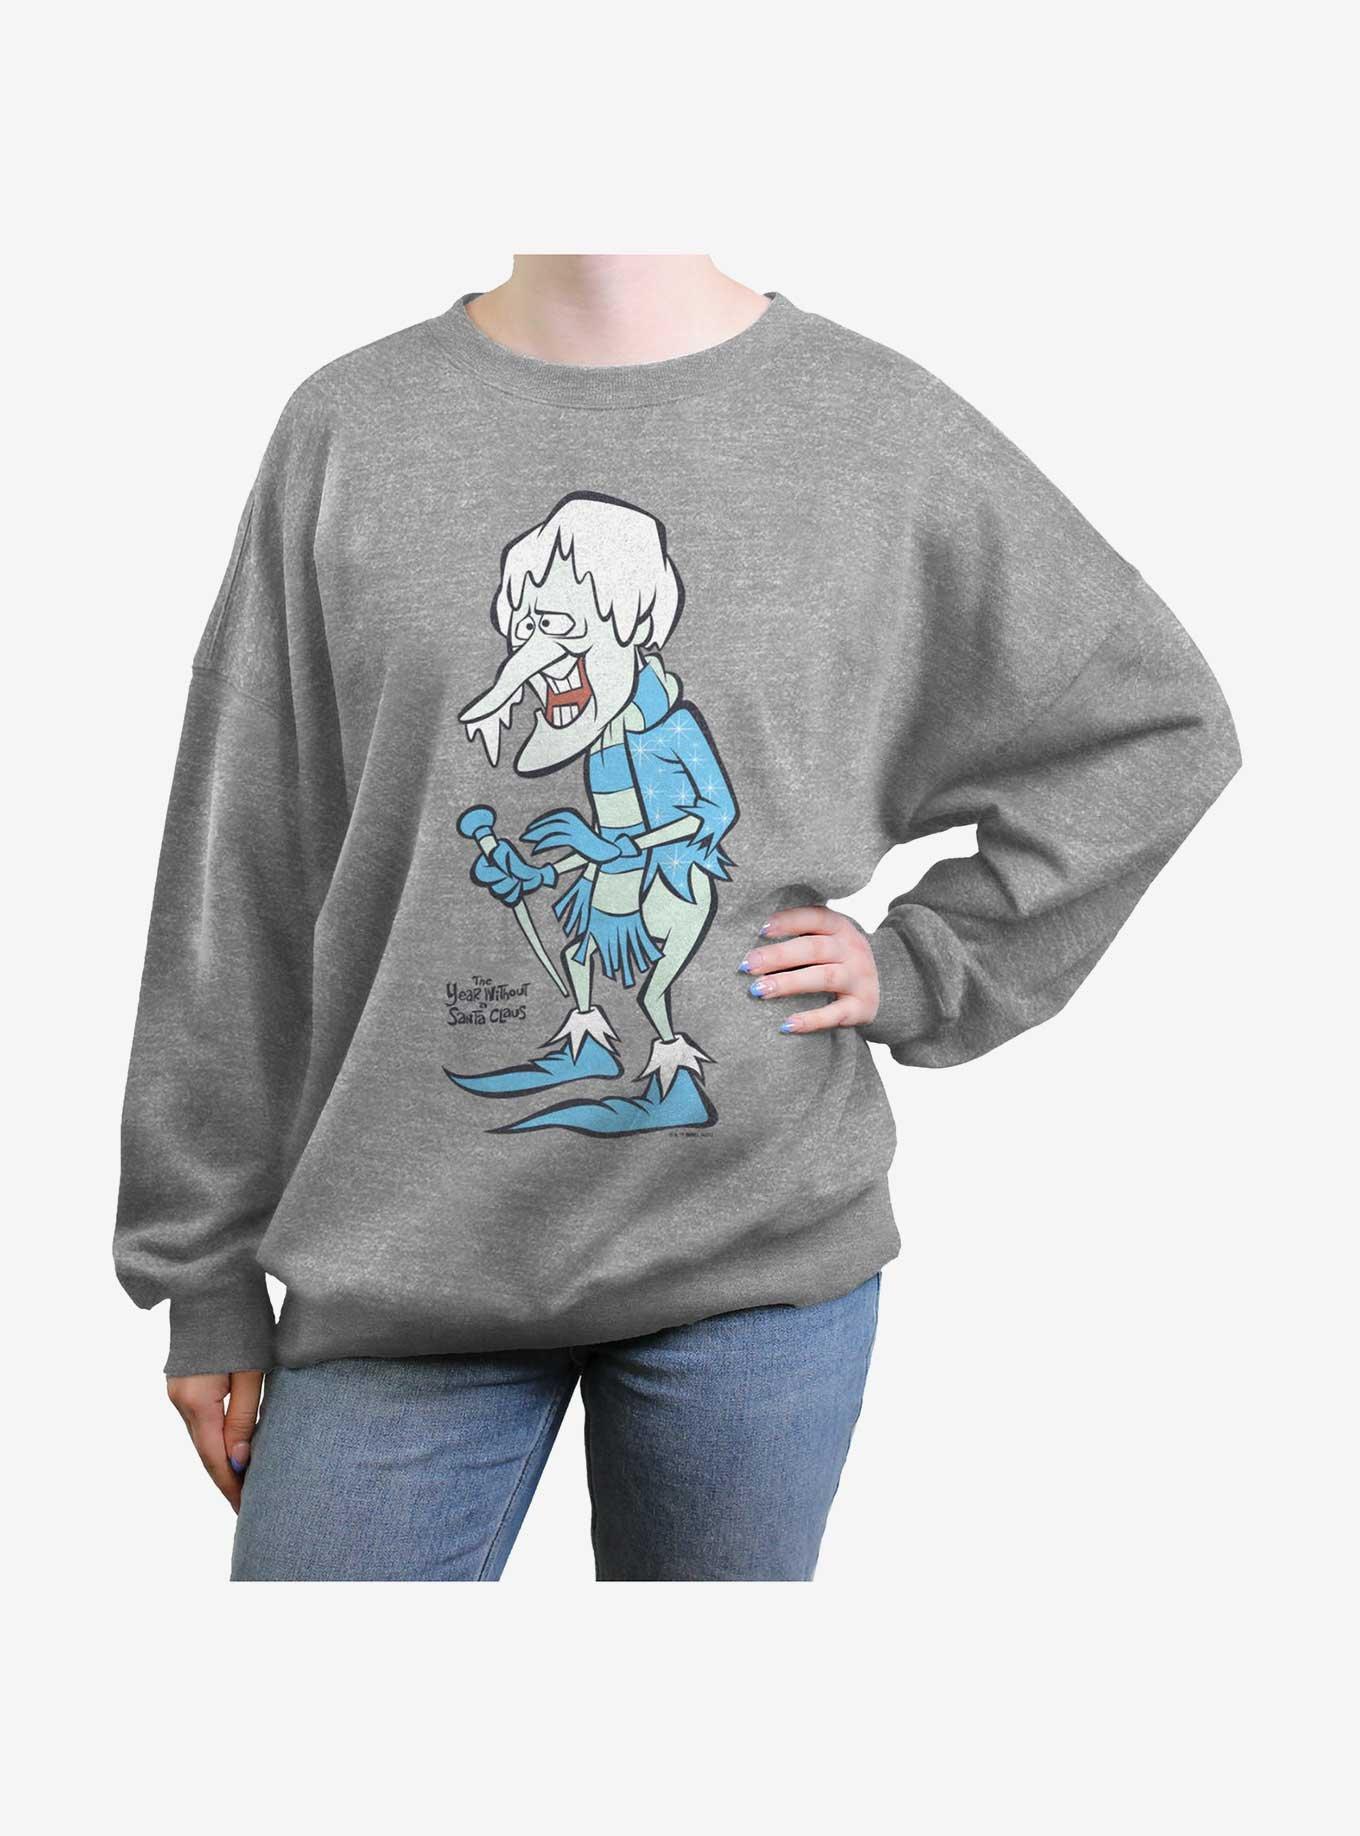 The Year Without a Santa Claus Snow Miser Girls Oversized Sweatshirt